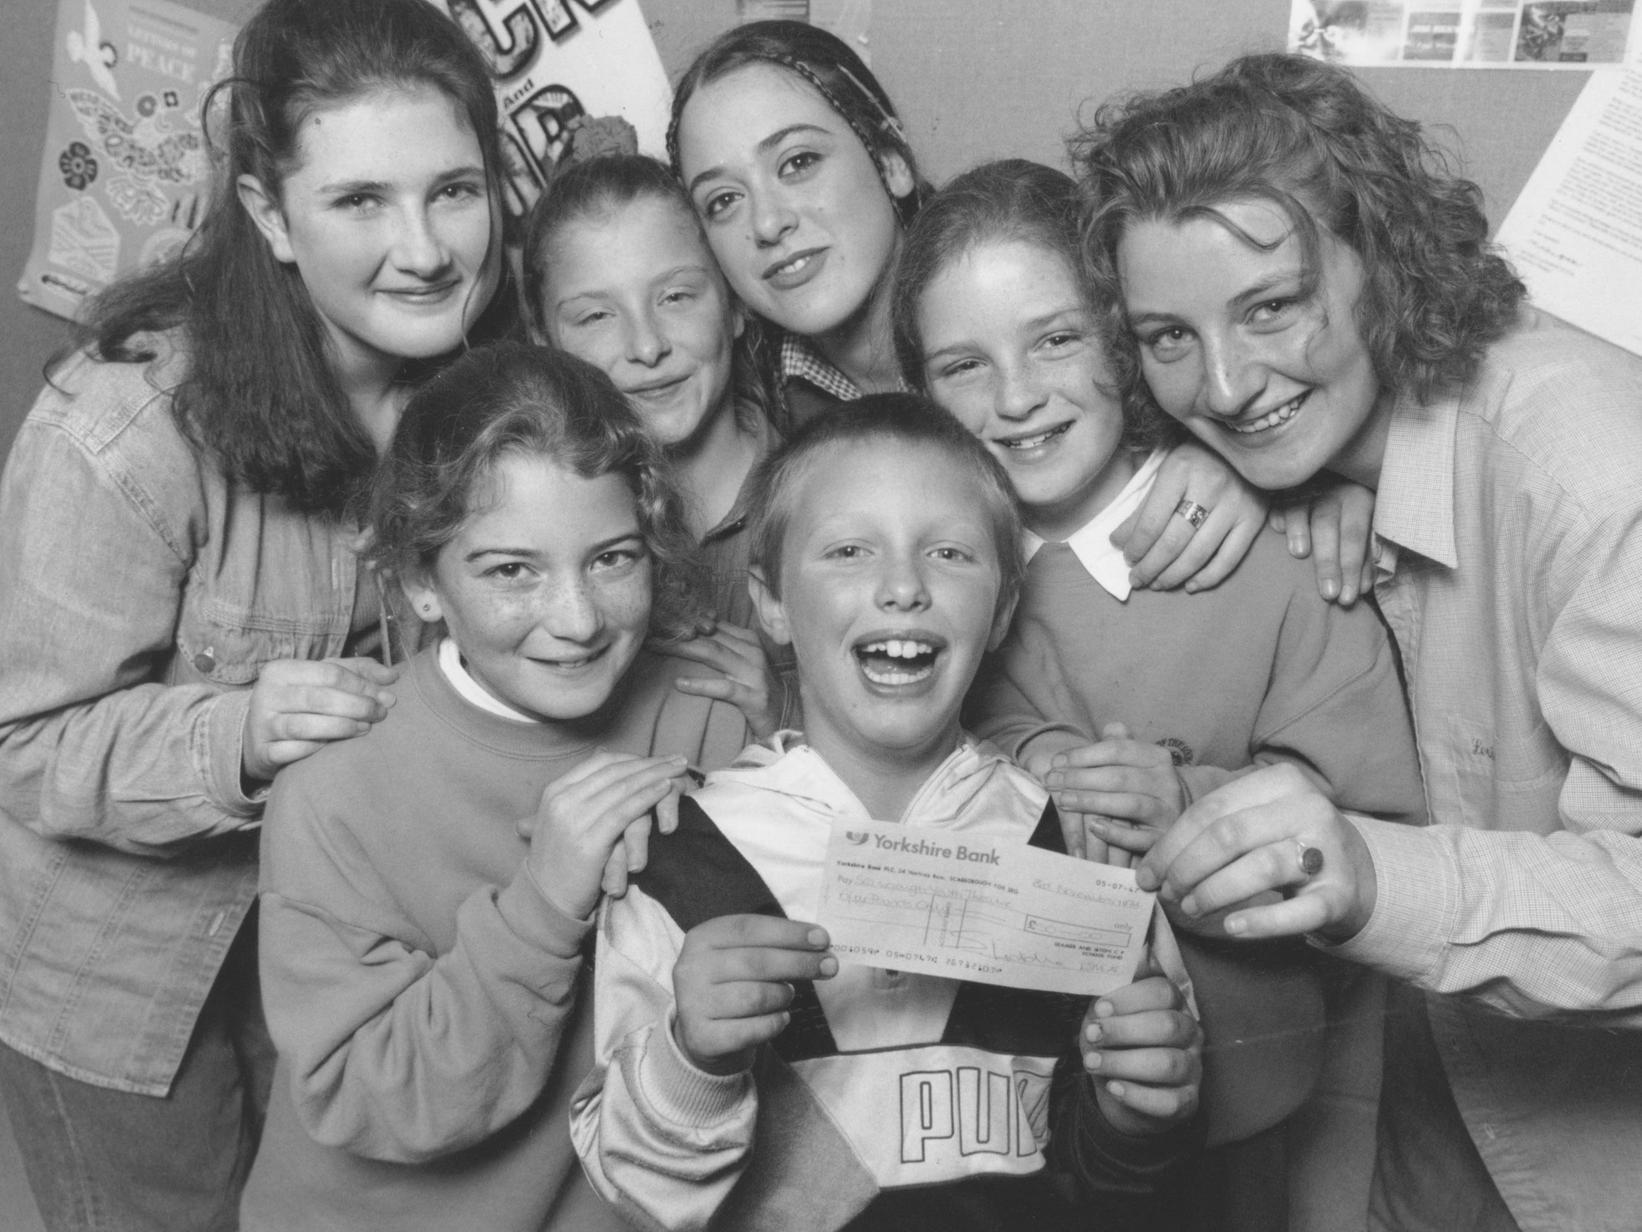 Seamer and Irton School pupils handed over a 50 cheque to members of the Scarborough Youth Theatre in November 1994. Pictured are actresses Sarah Fettes, left, Francesca Santamaria, centre, and Becky Jackson, left, with pupils Jessica Hall, second left, Wendy Peers, Mark Storeman, and Hayley Botham.